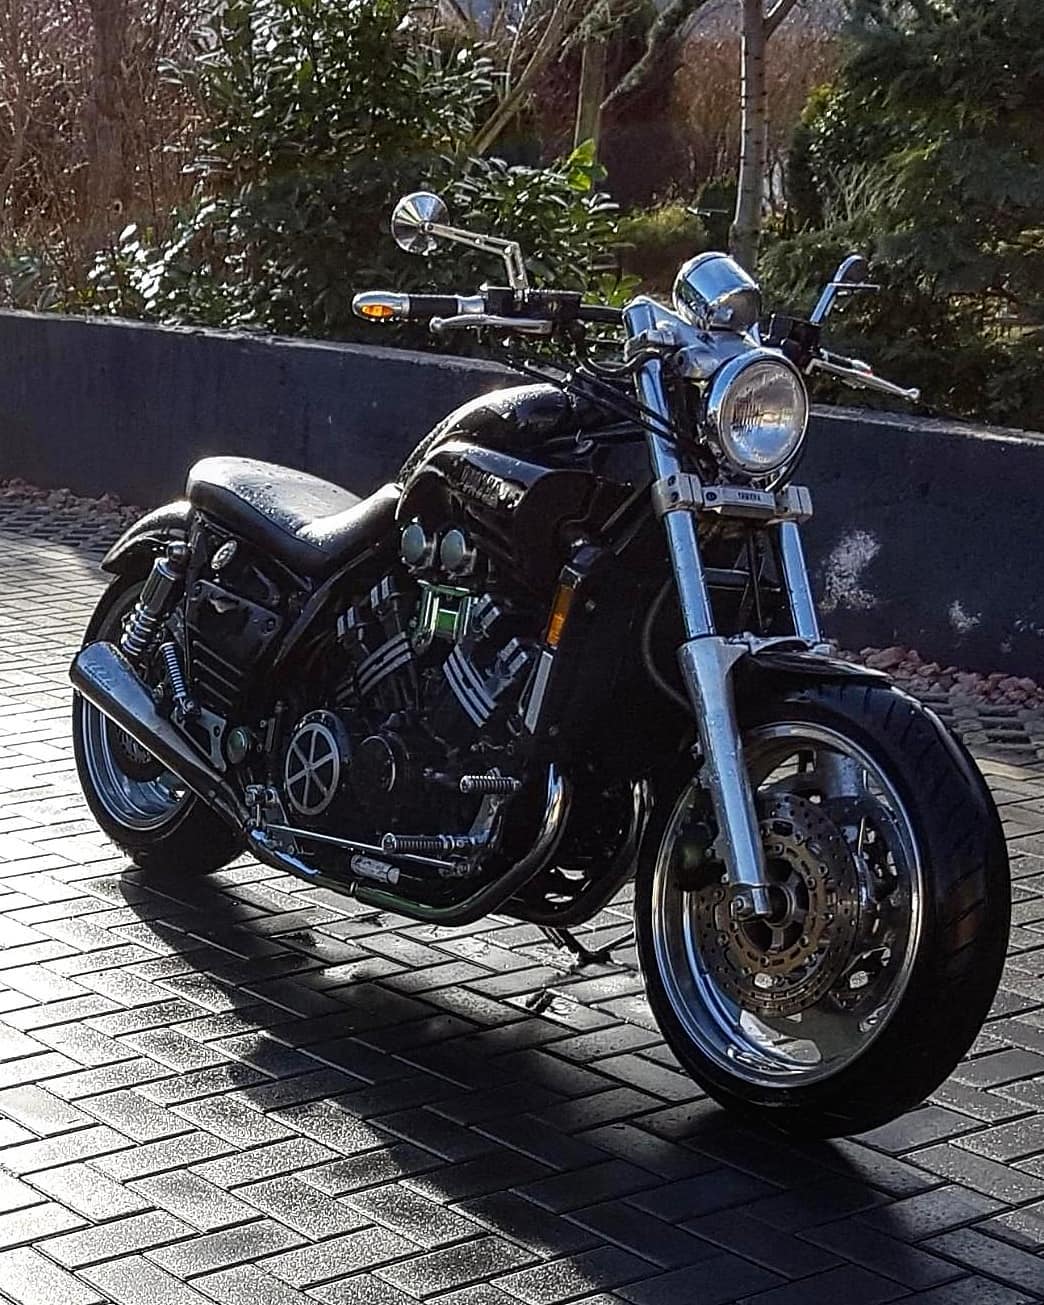 black motorcycle being kept in a driveway photo by Instagram user @yamaha.vmax.1200.only